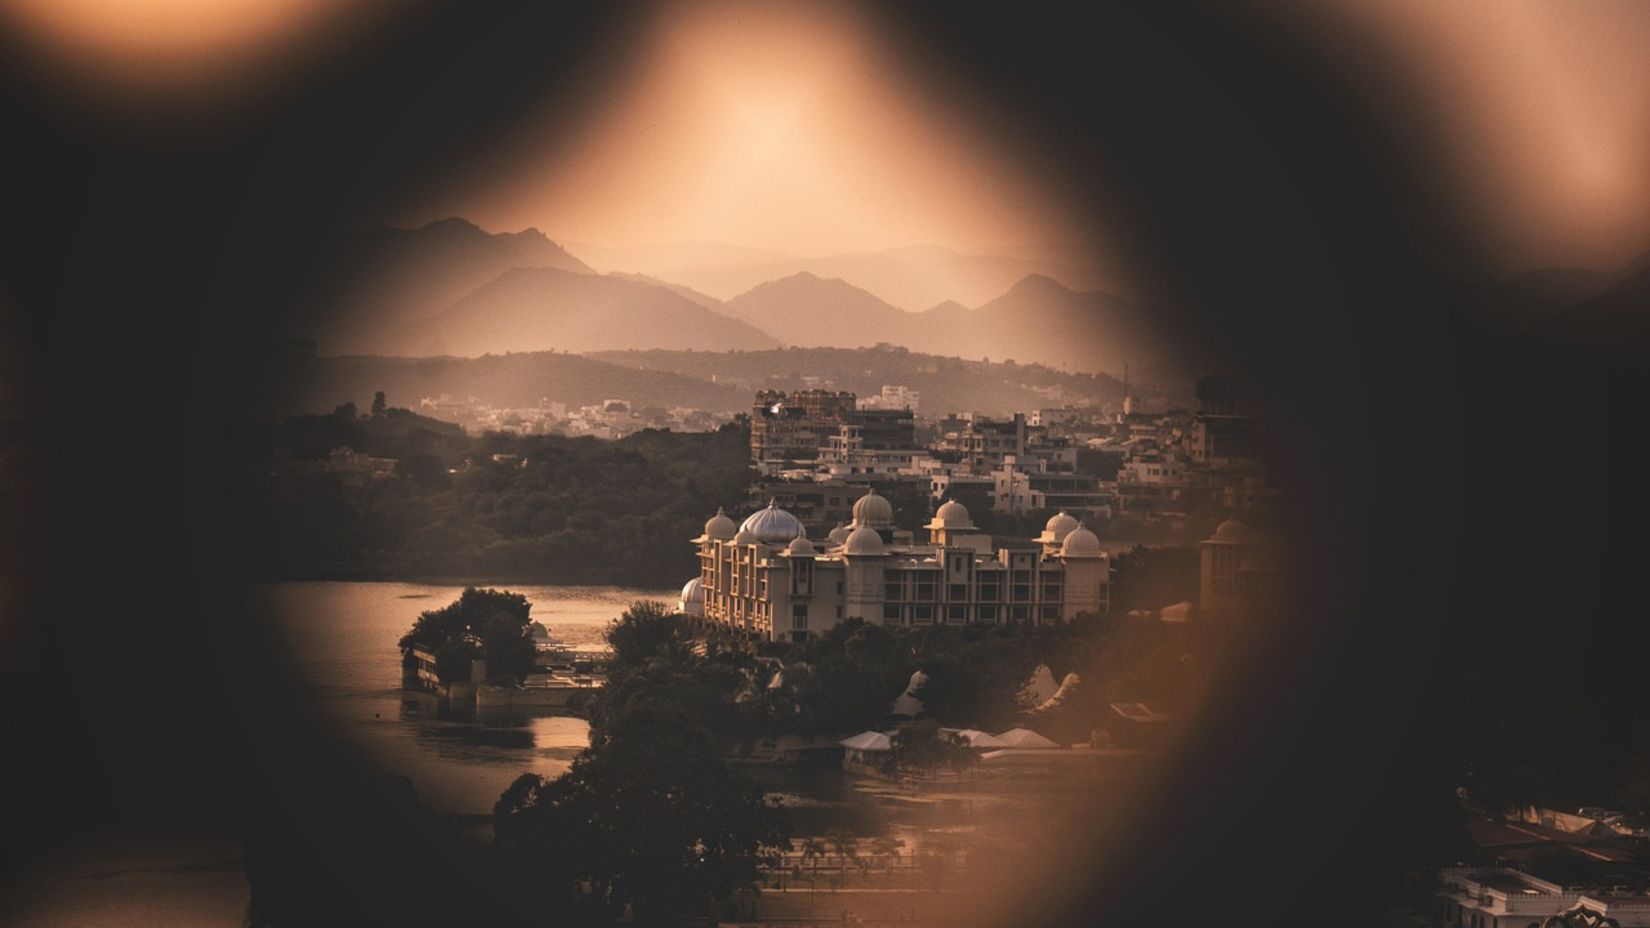 A blurry foreground revealed the Udaipur metropolis, with the shadows of mountains and the brightness of lights in the backdrop